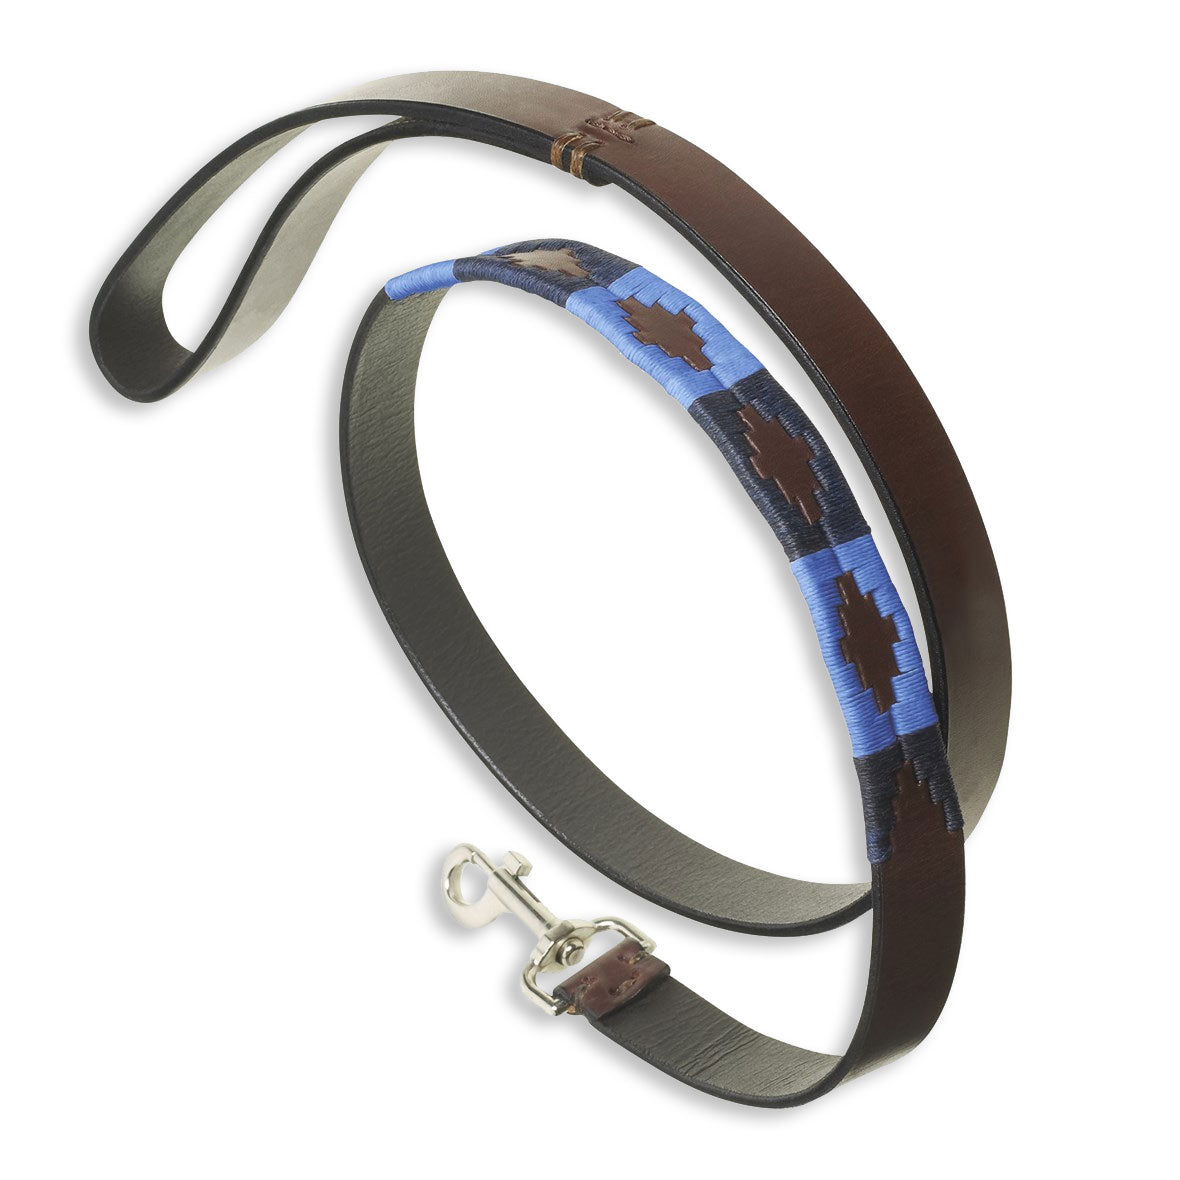 Large Pampeano Azules Leather Dog Lead | Sky blue, Navy, Rich Brown Leather